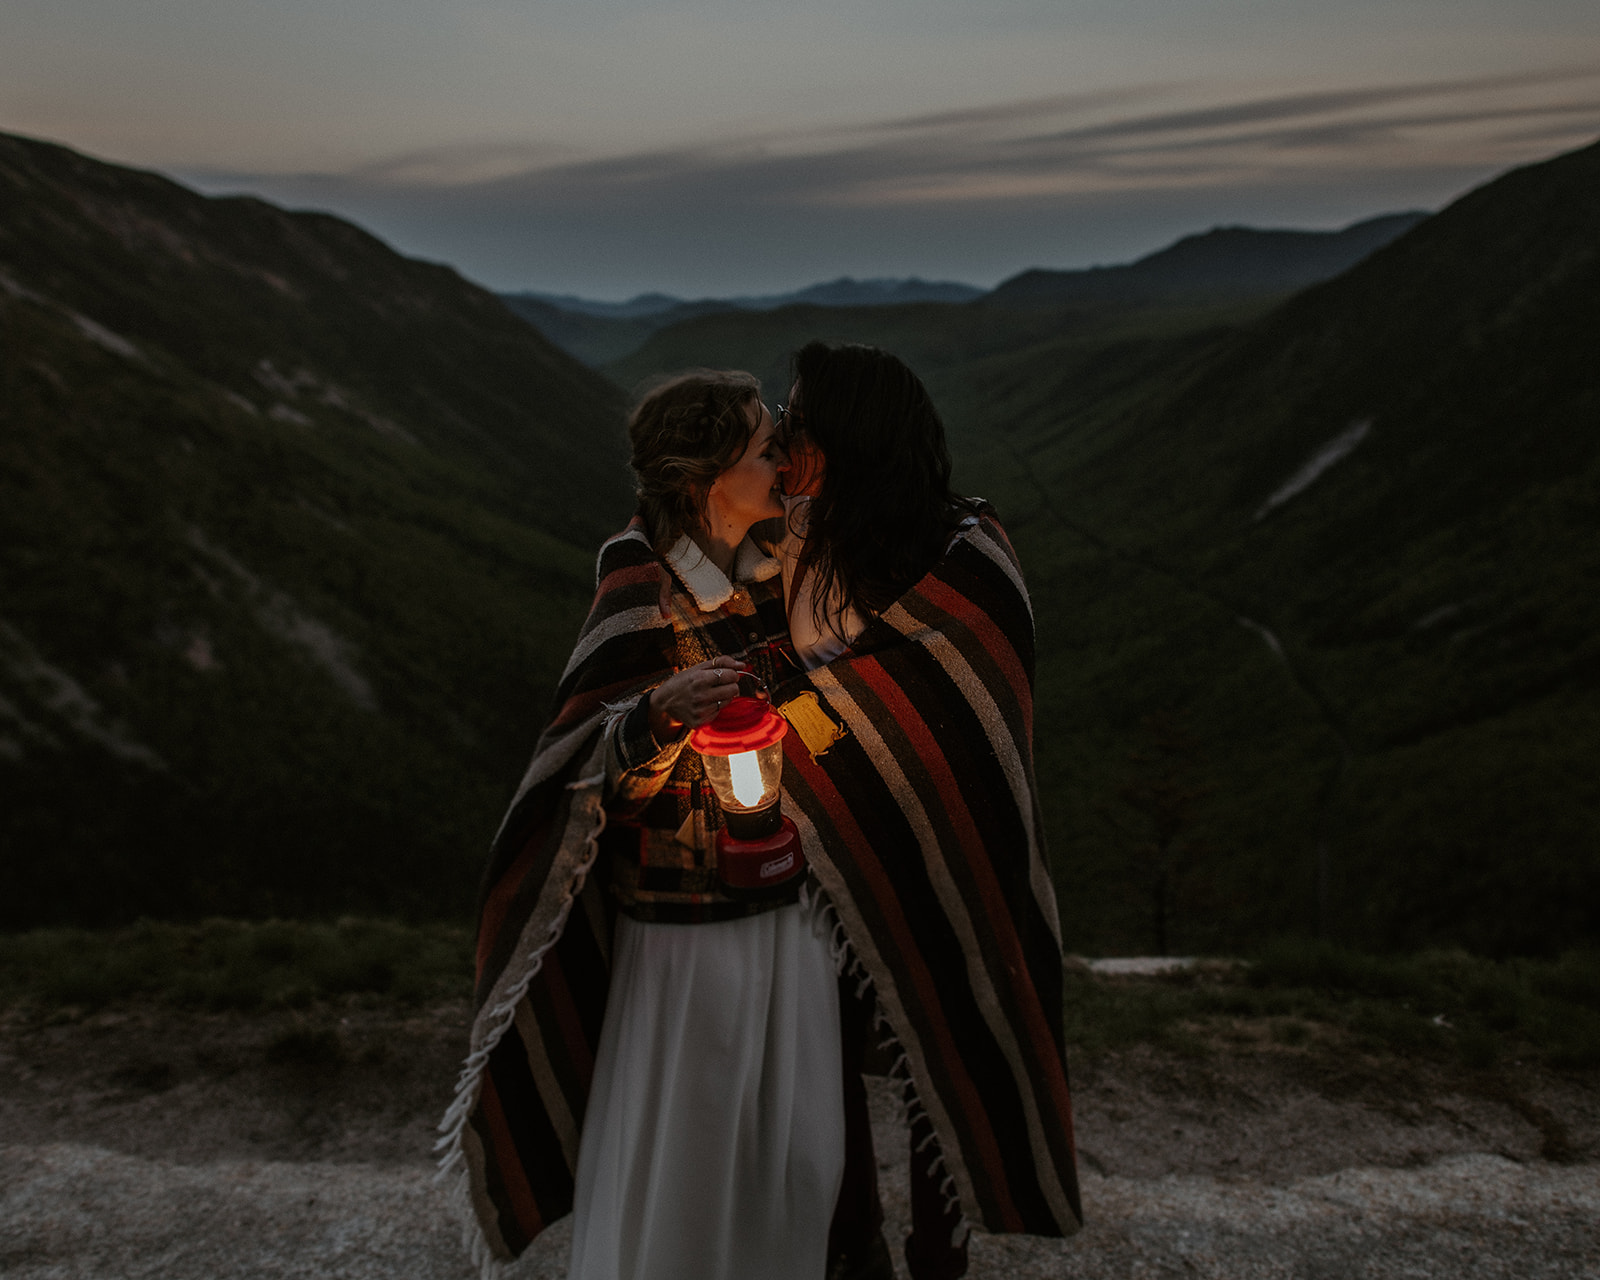 Couple under blanket kisses with lantern